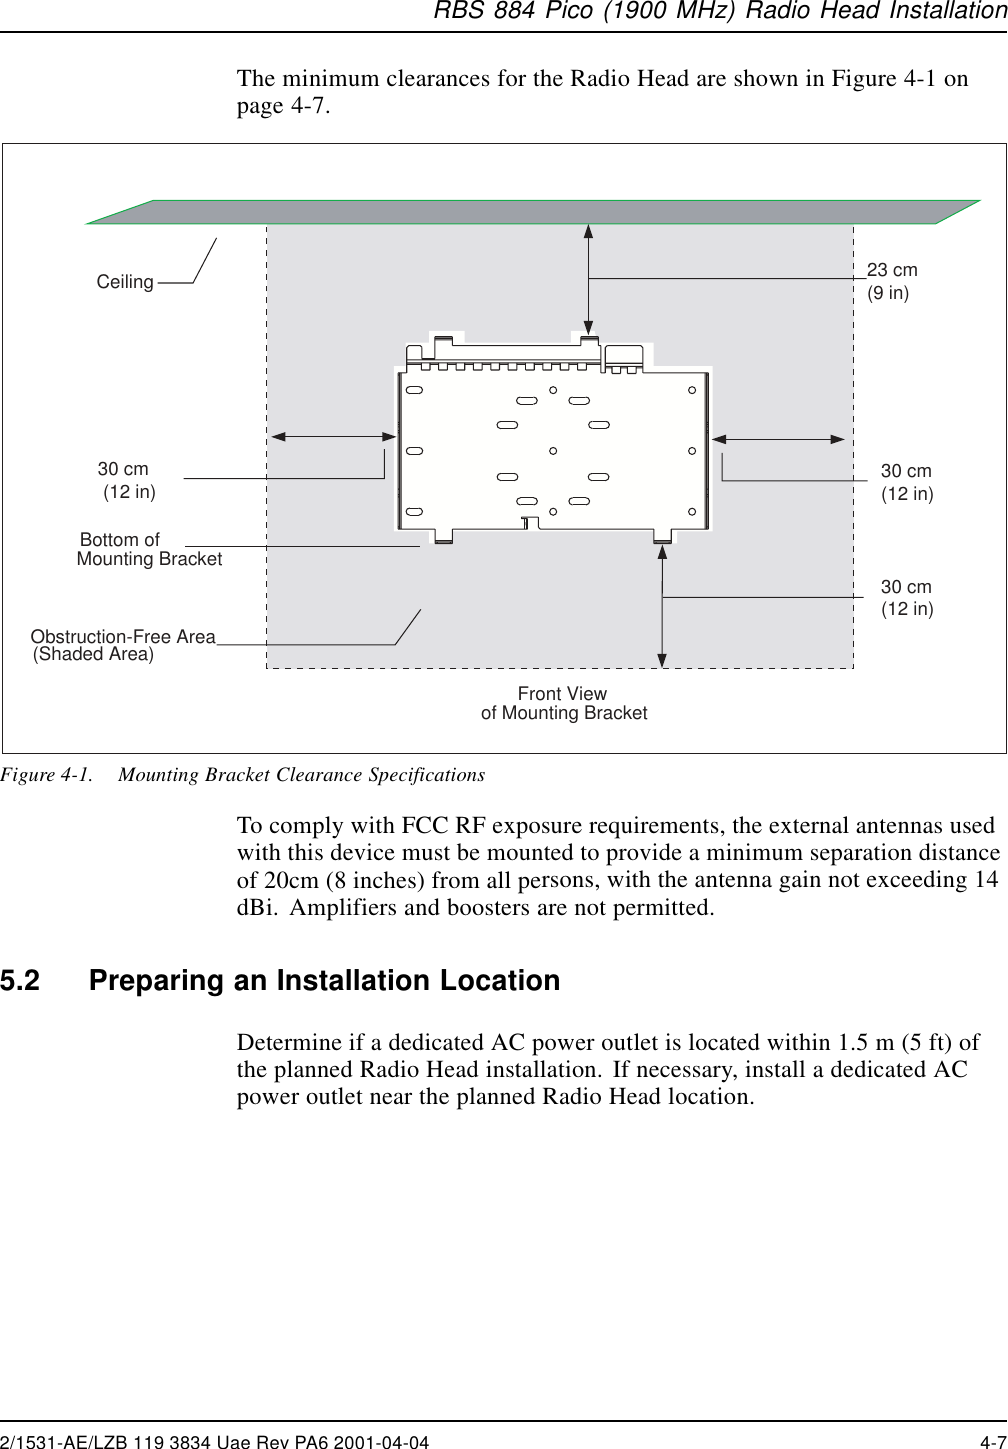 RBS 884 Pico (1900 MHz) Radio Head InstallationThe minimum clearances for the Radio Head are shown in Figure 4-1 onpage 4-7. Front Viewof Mounting Bracket Ceiling 23 cm (9 in)Bottom of Mounting BracketObstruction-Free Area(Shaded Area)30 cm (12 in) 30 cm (12 in)30 cm (12 in)Figure 4-1. Mounting Bracket Clearance SpecificationsTo comply with FCC RF exposure requirements, the external antennas usedwith this device must be mounted to provide a minimum separation distanceof 20cm (8 inches) from all persons, with the antenna gain not exceeding 14dBi. Amplifiers and boosters are not permitted.5.2 Preparing an Installation LocationDetermine if a dedicated AC power outlet is located within 1.5 m (5 ft) ofthe planned Radio Head installation. If necessary, install a dedicated ACpower outlet near the planned Radio Head location.2/1531-AE/LZB 119 3834 Uae Rev PA6 2001-04-04 4-7